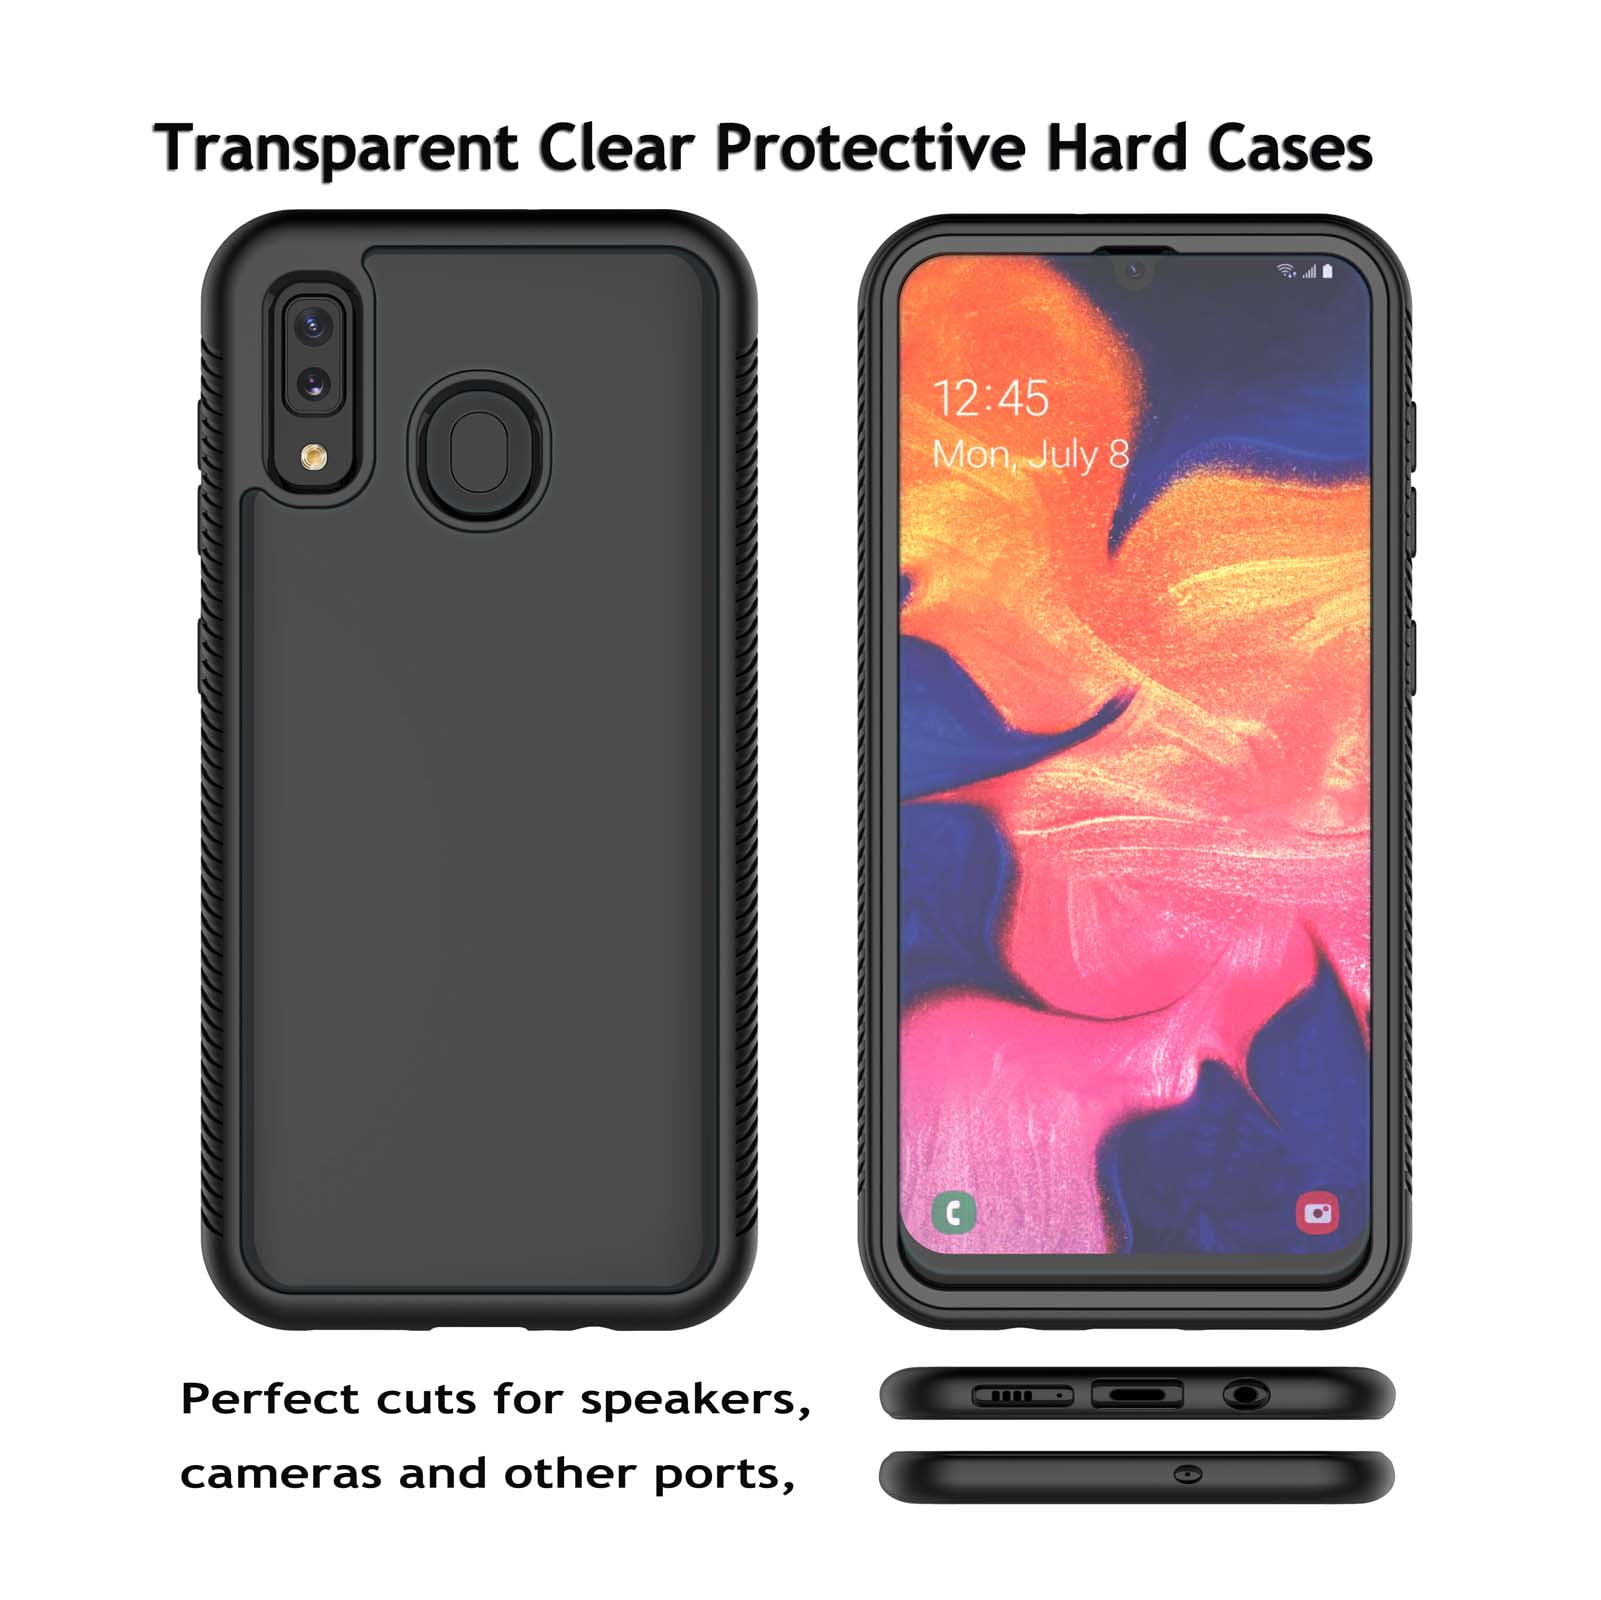 Galaxy A20 Case Phone Case Cover For Samsung A20 A205u Njjex Full Body Rugged Transparent Clear Back Bumper Galaxy A20 Case With Screen Protector For Galaxy A20 6 4 2019 Walmart Com - golden bling braces codes for roblox high school